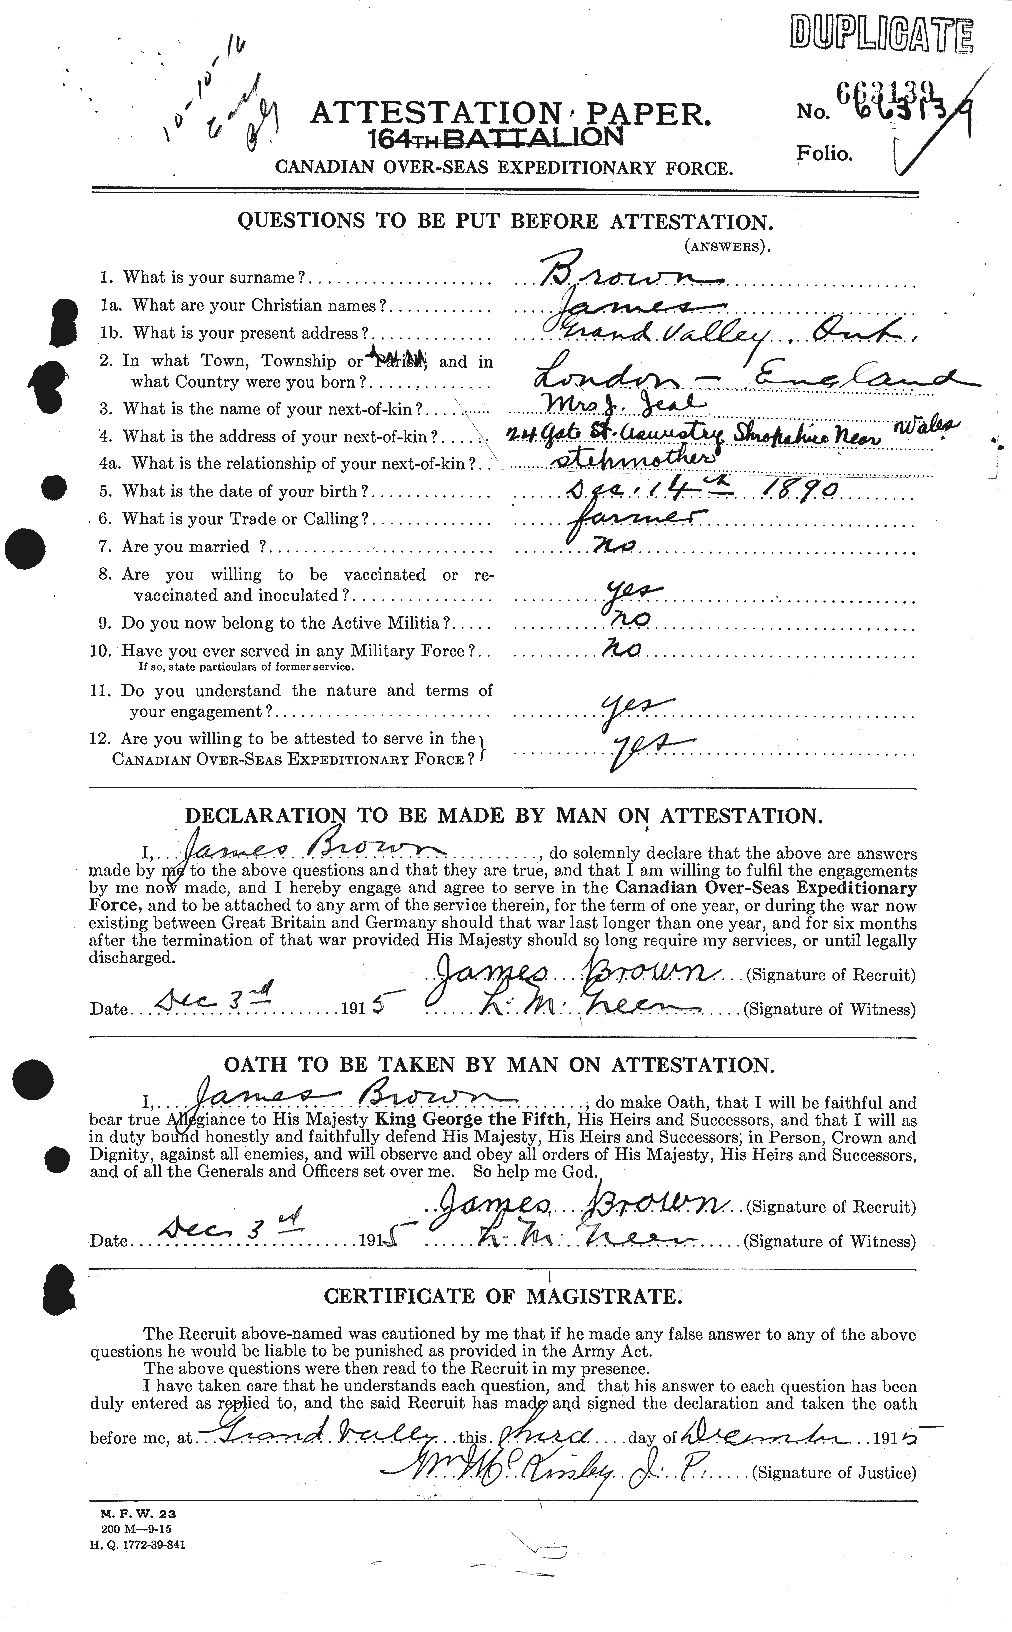 Personnel Records of the First World War - CEF 265765a